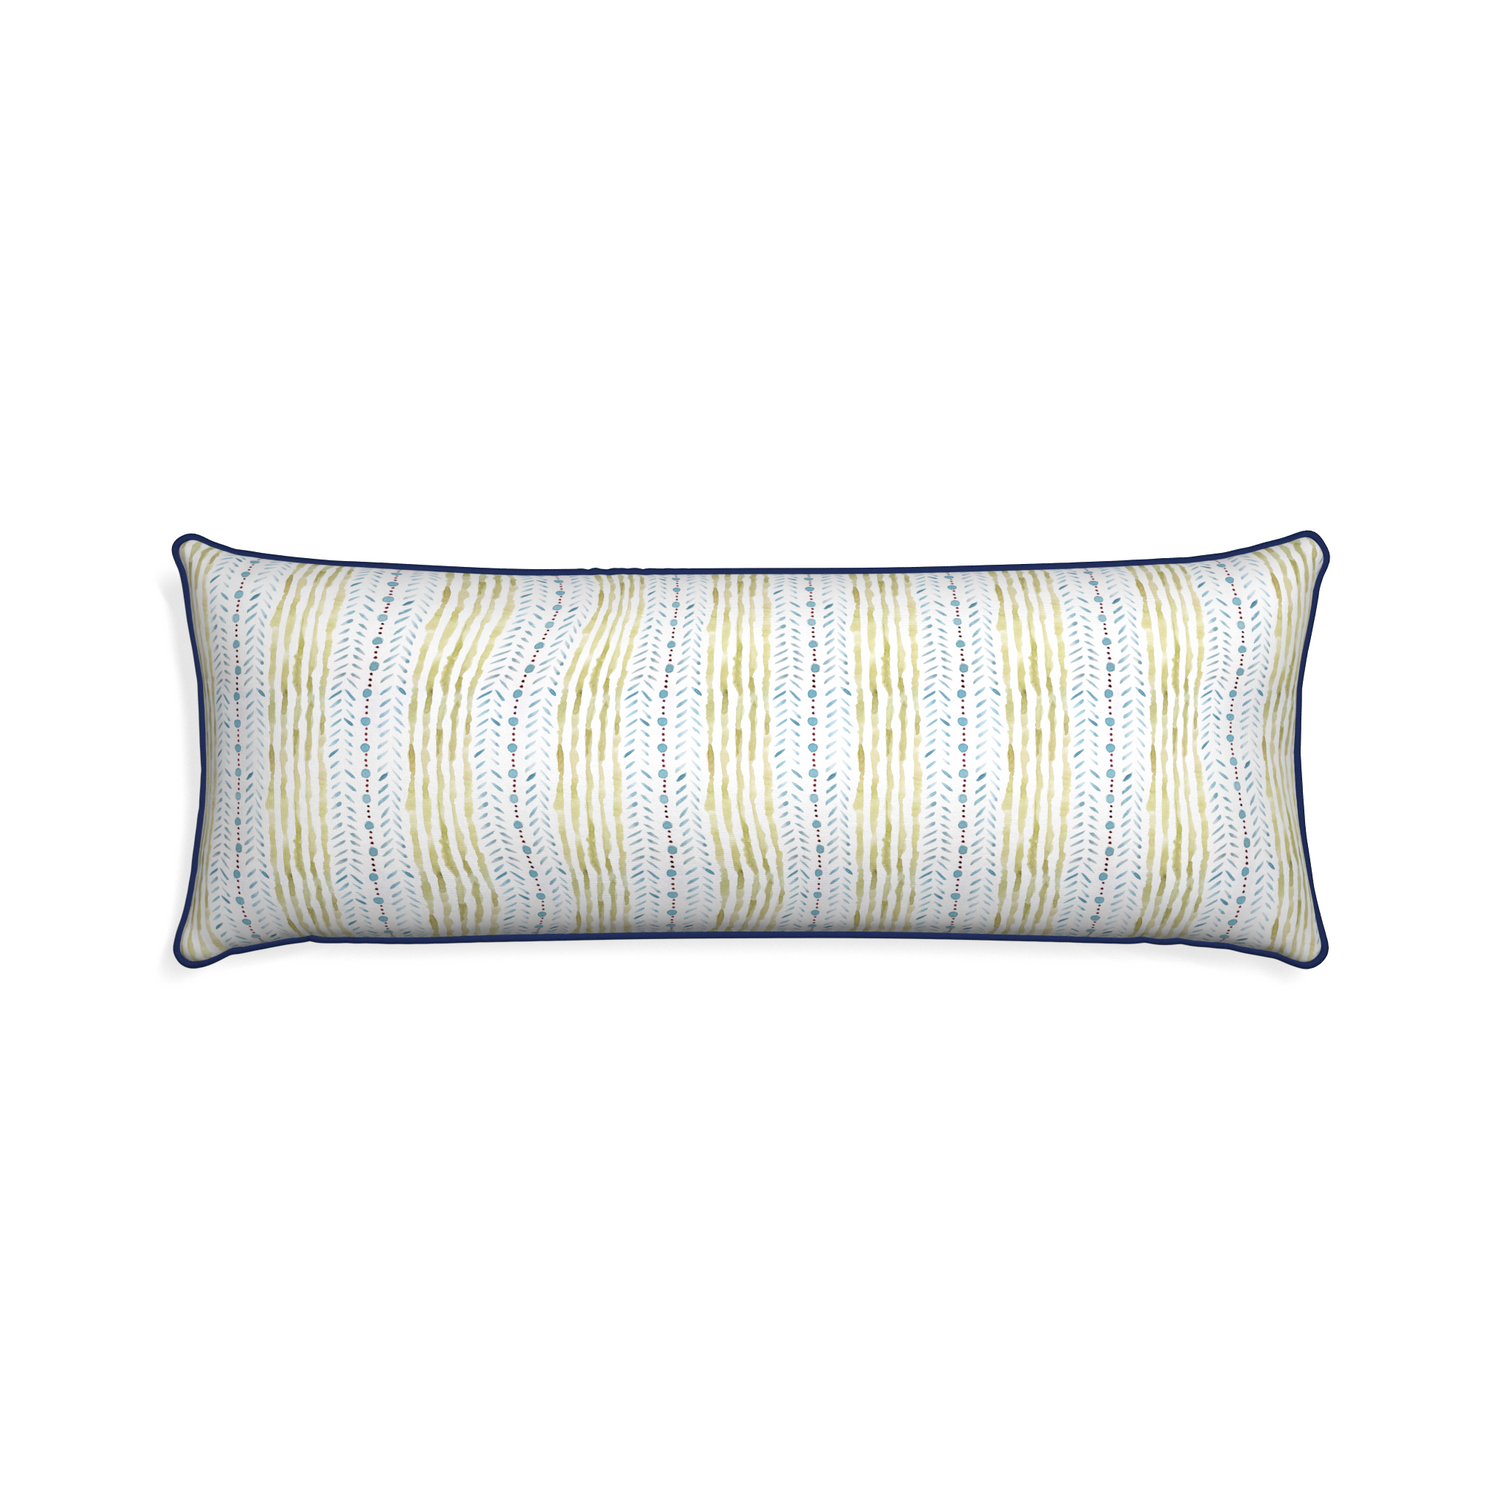 Xl-lumbar julia custom blue & green stripedpillow with midnight piping on white background